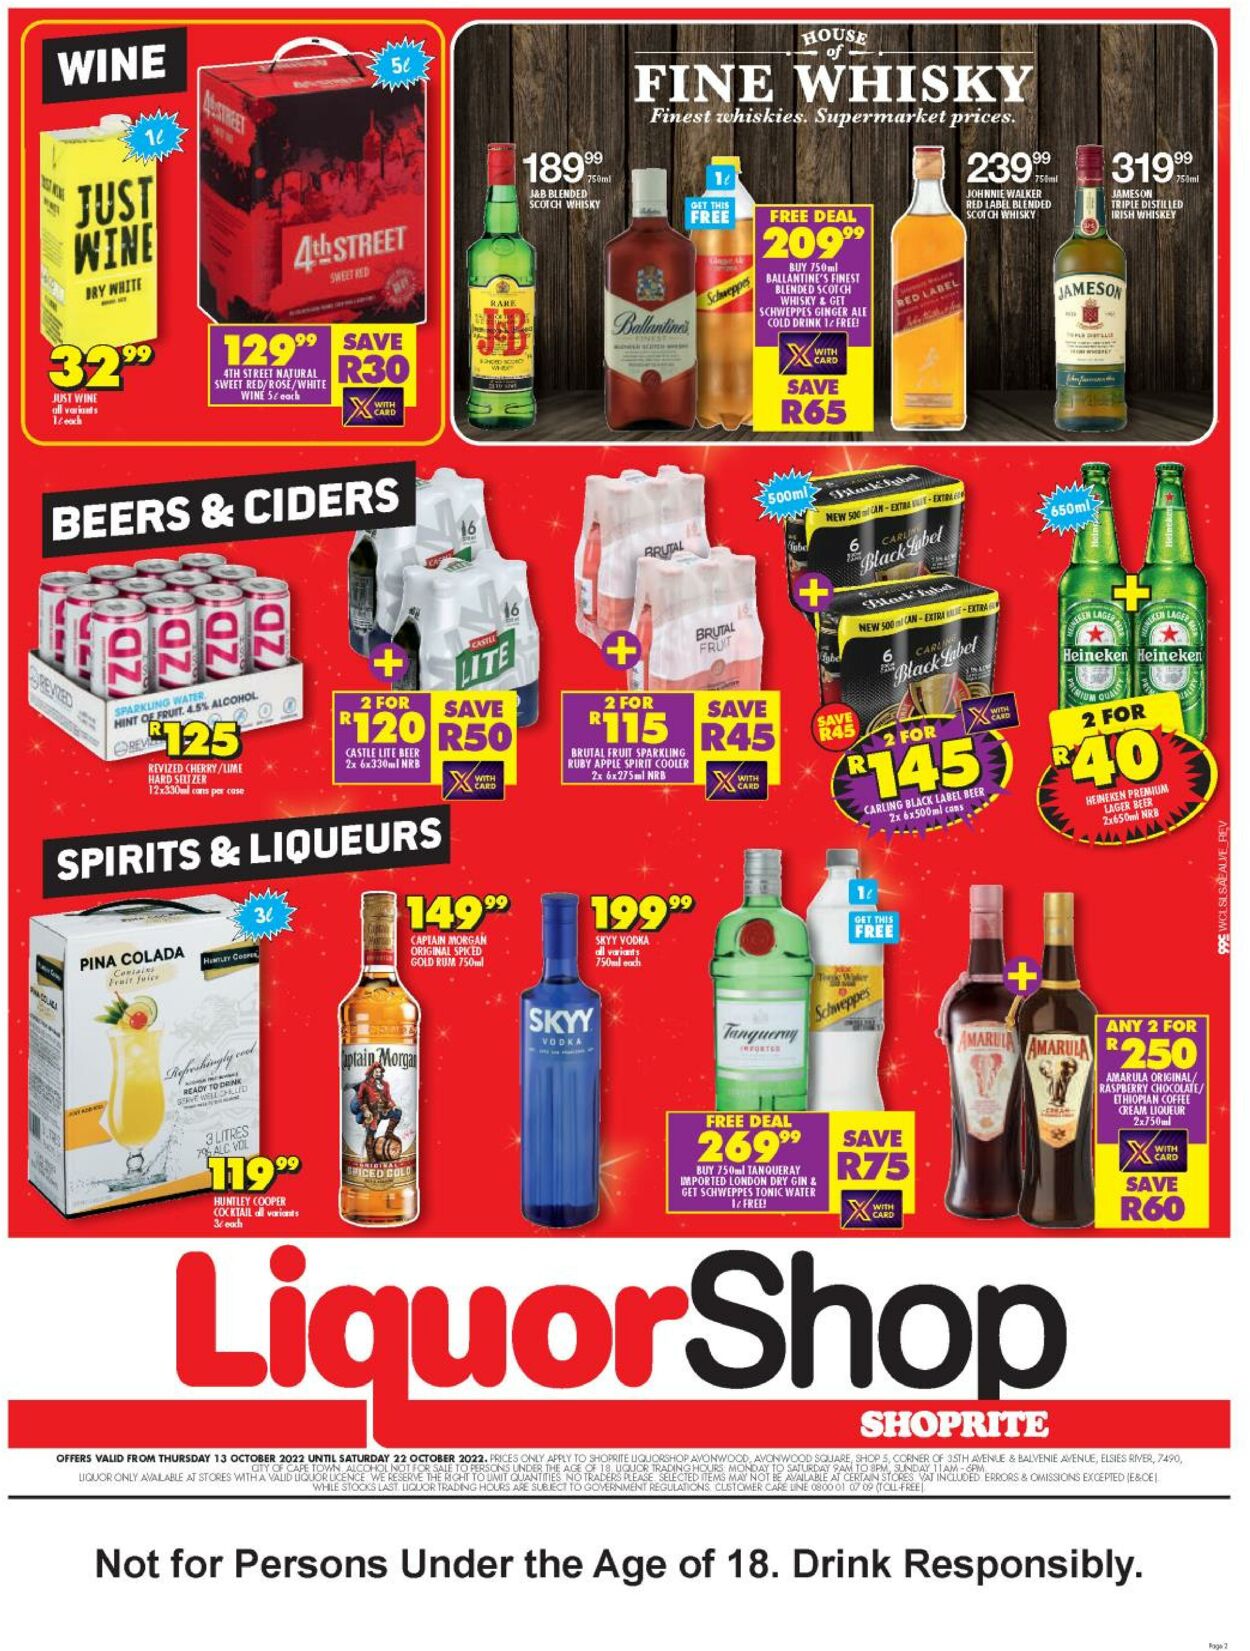 Shoprite Promotional Leaflet - Valid from 13.10 to 22.10 - Page nb 2 ...